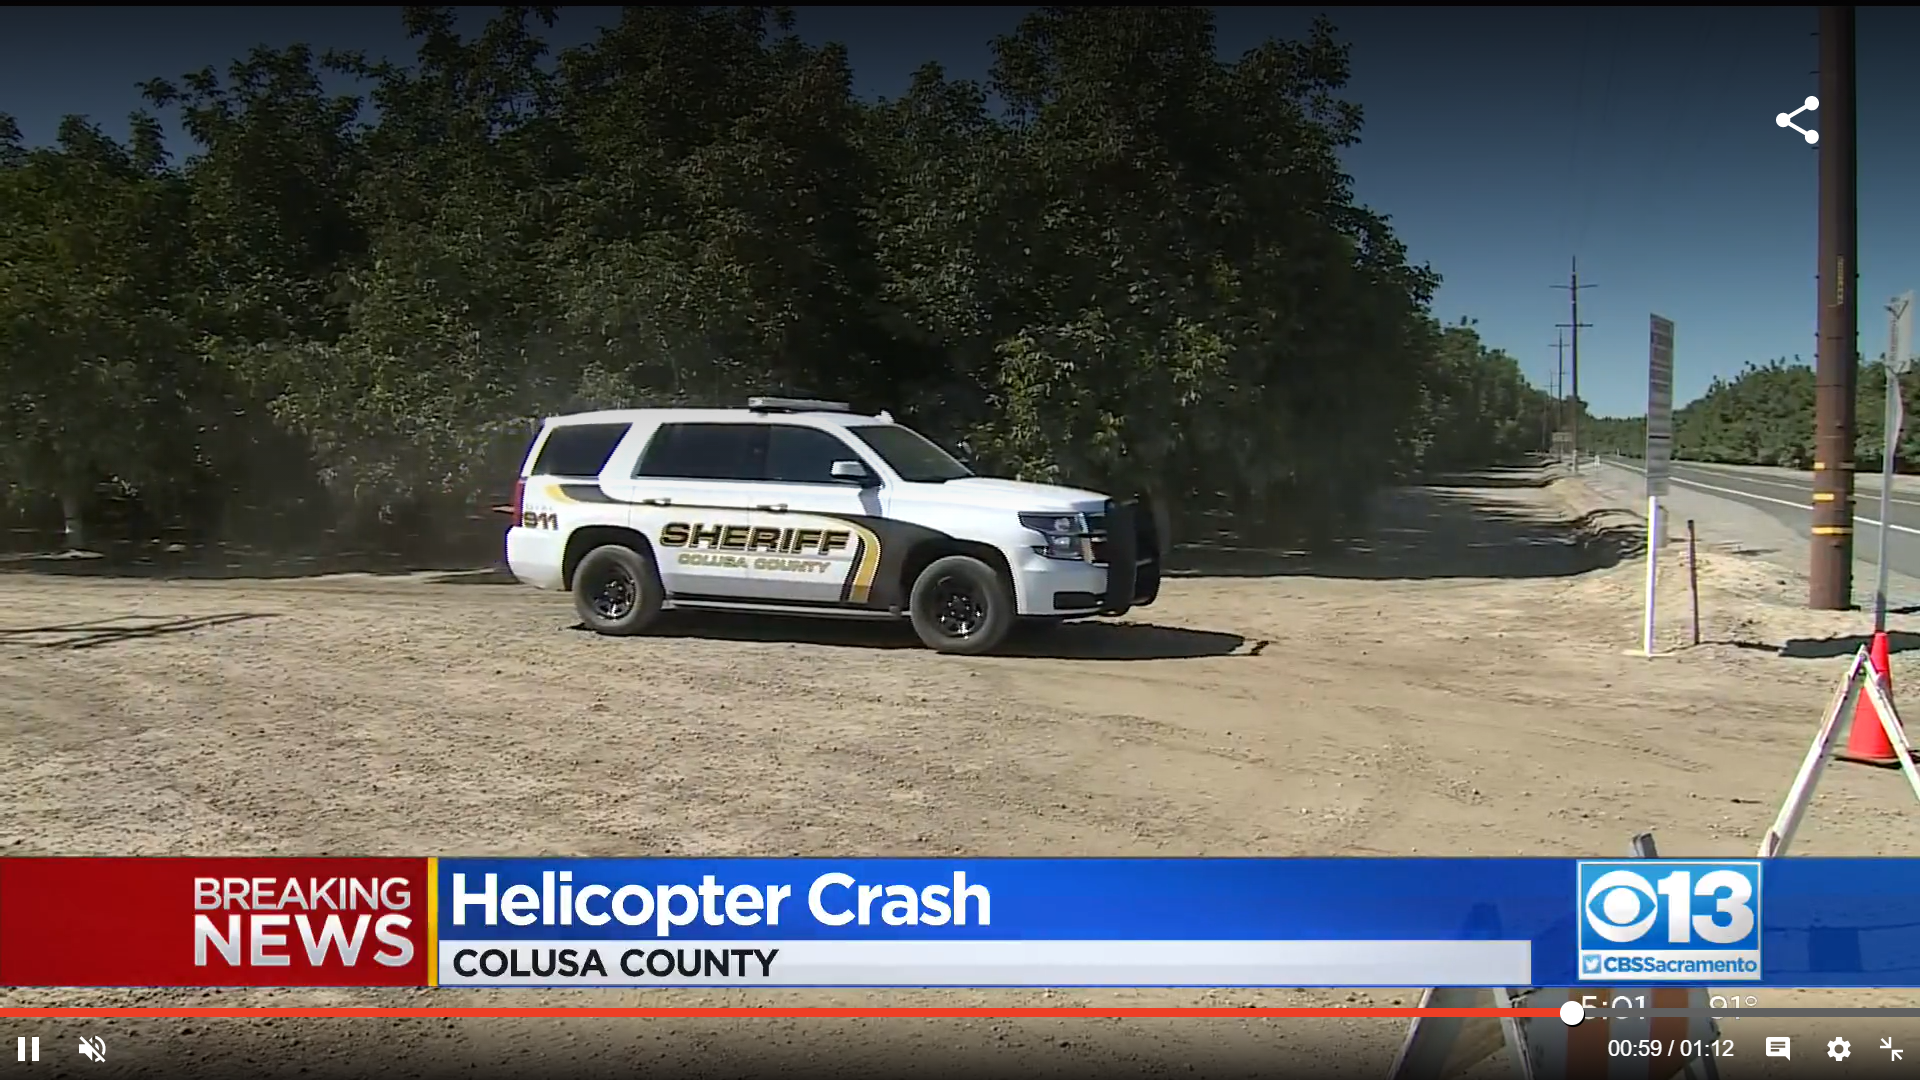 The Colusa County Sheriff’s Department says the four people died at the scene of the crash